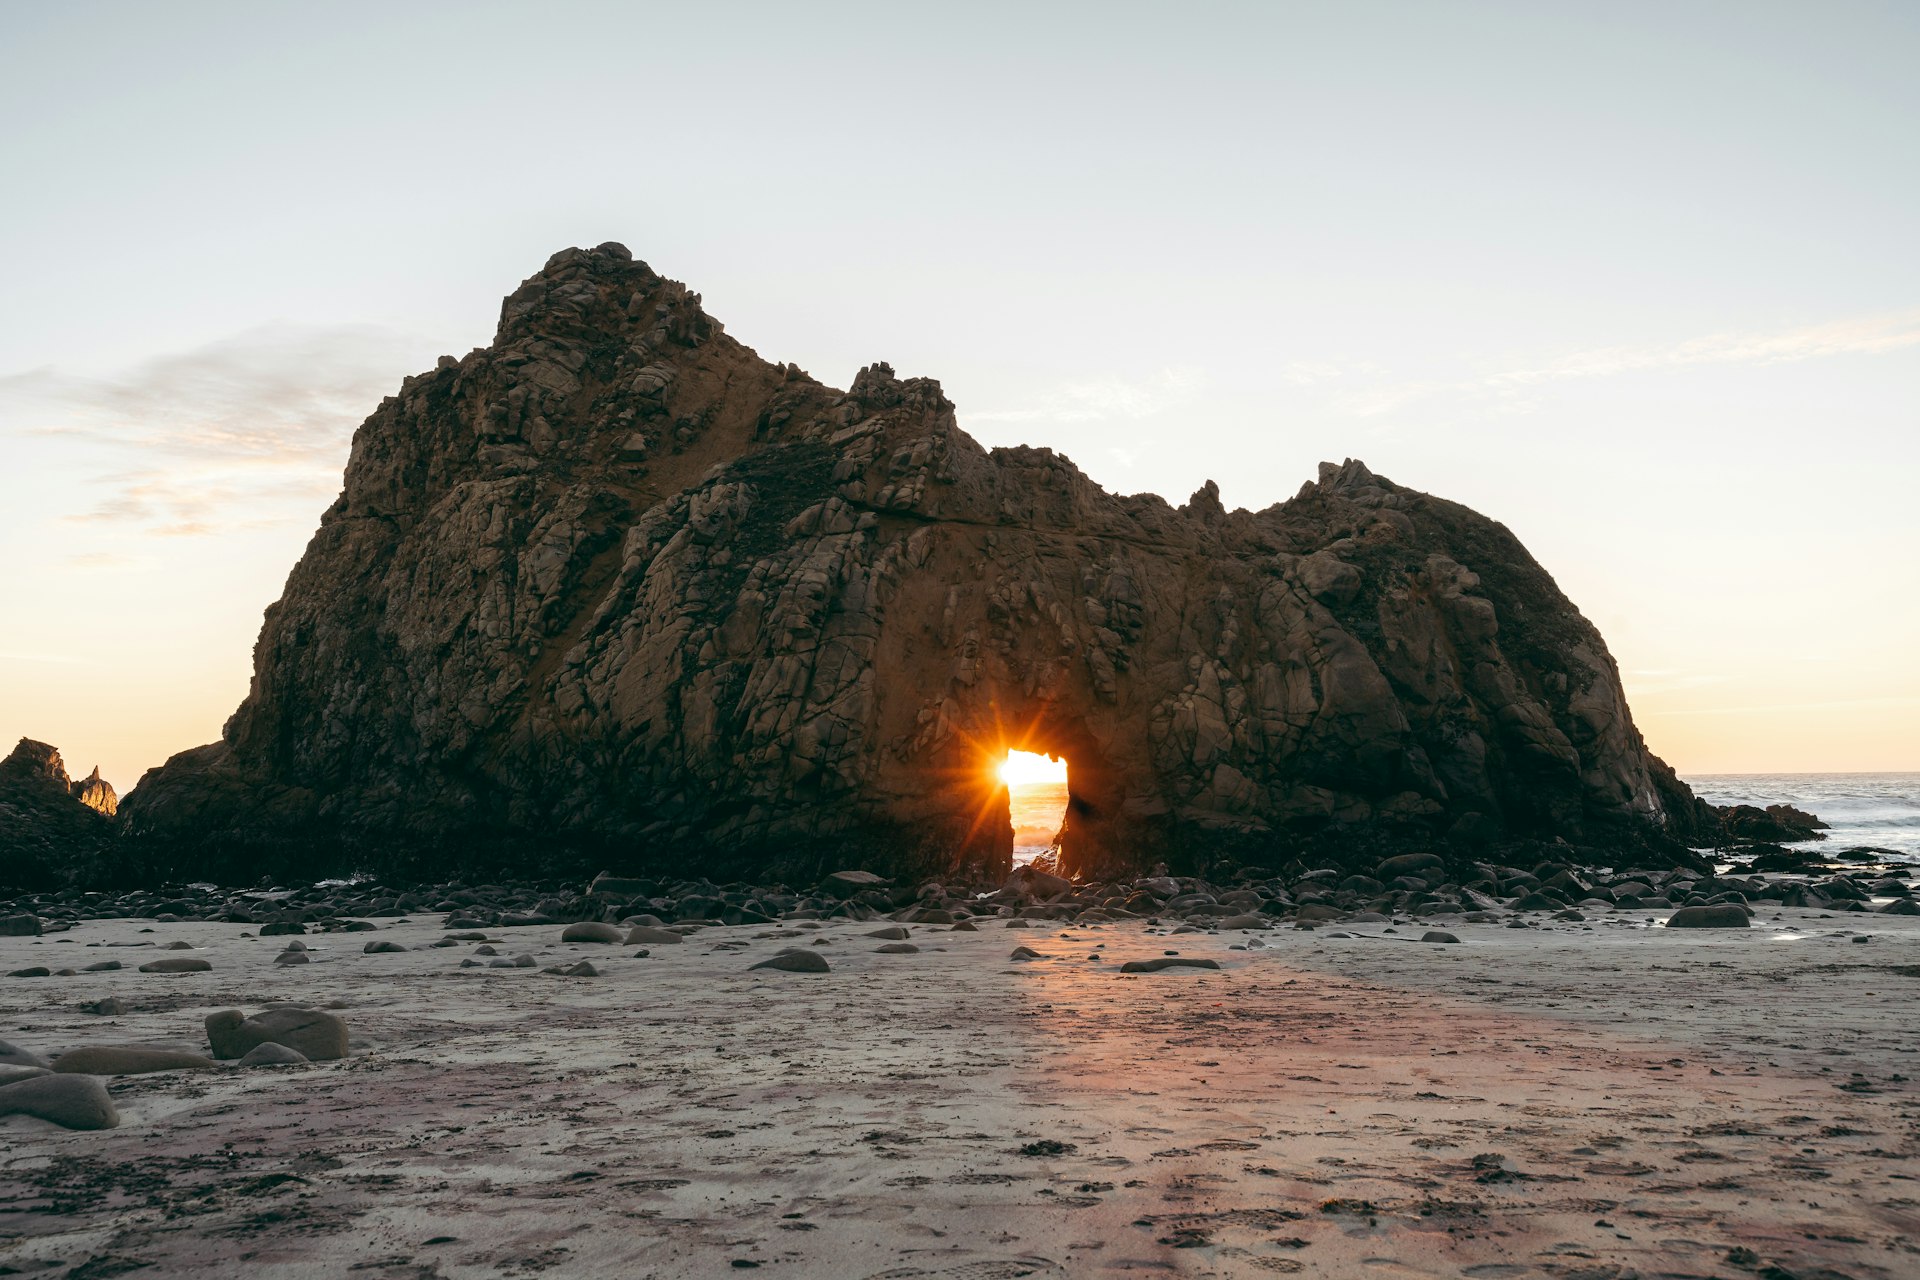 Sunset light passes through the arch of a rock formation, Pfeiffer Beach, Big Sur, California